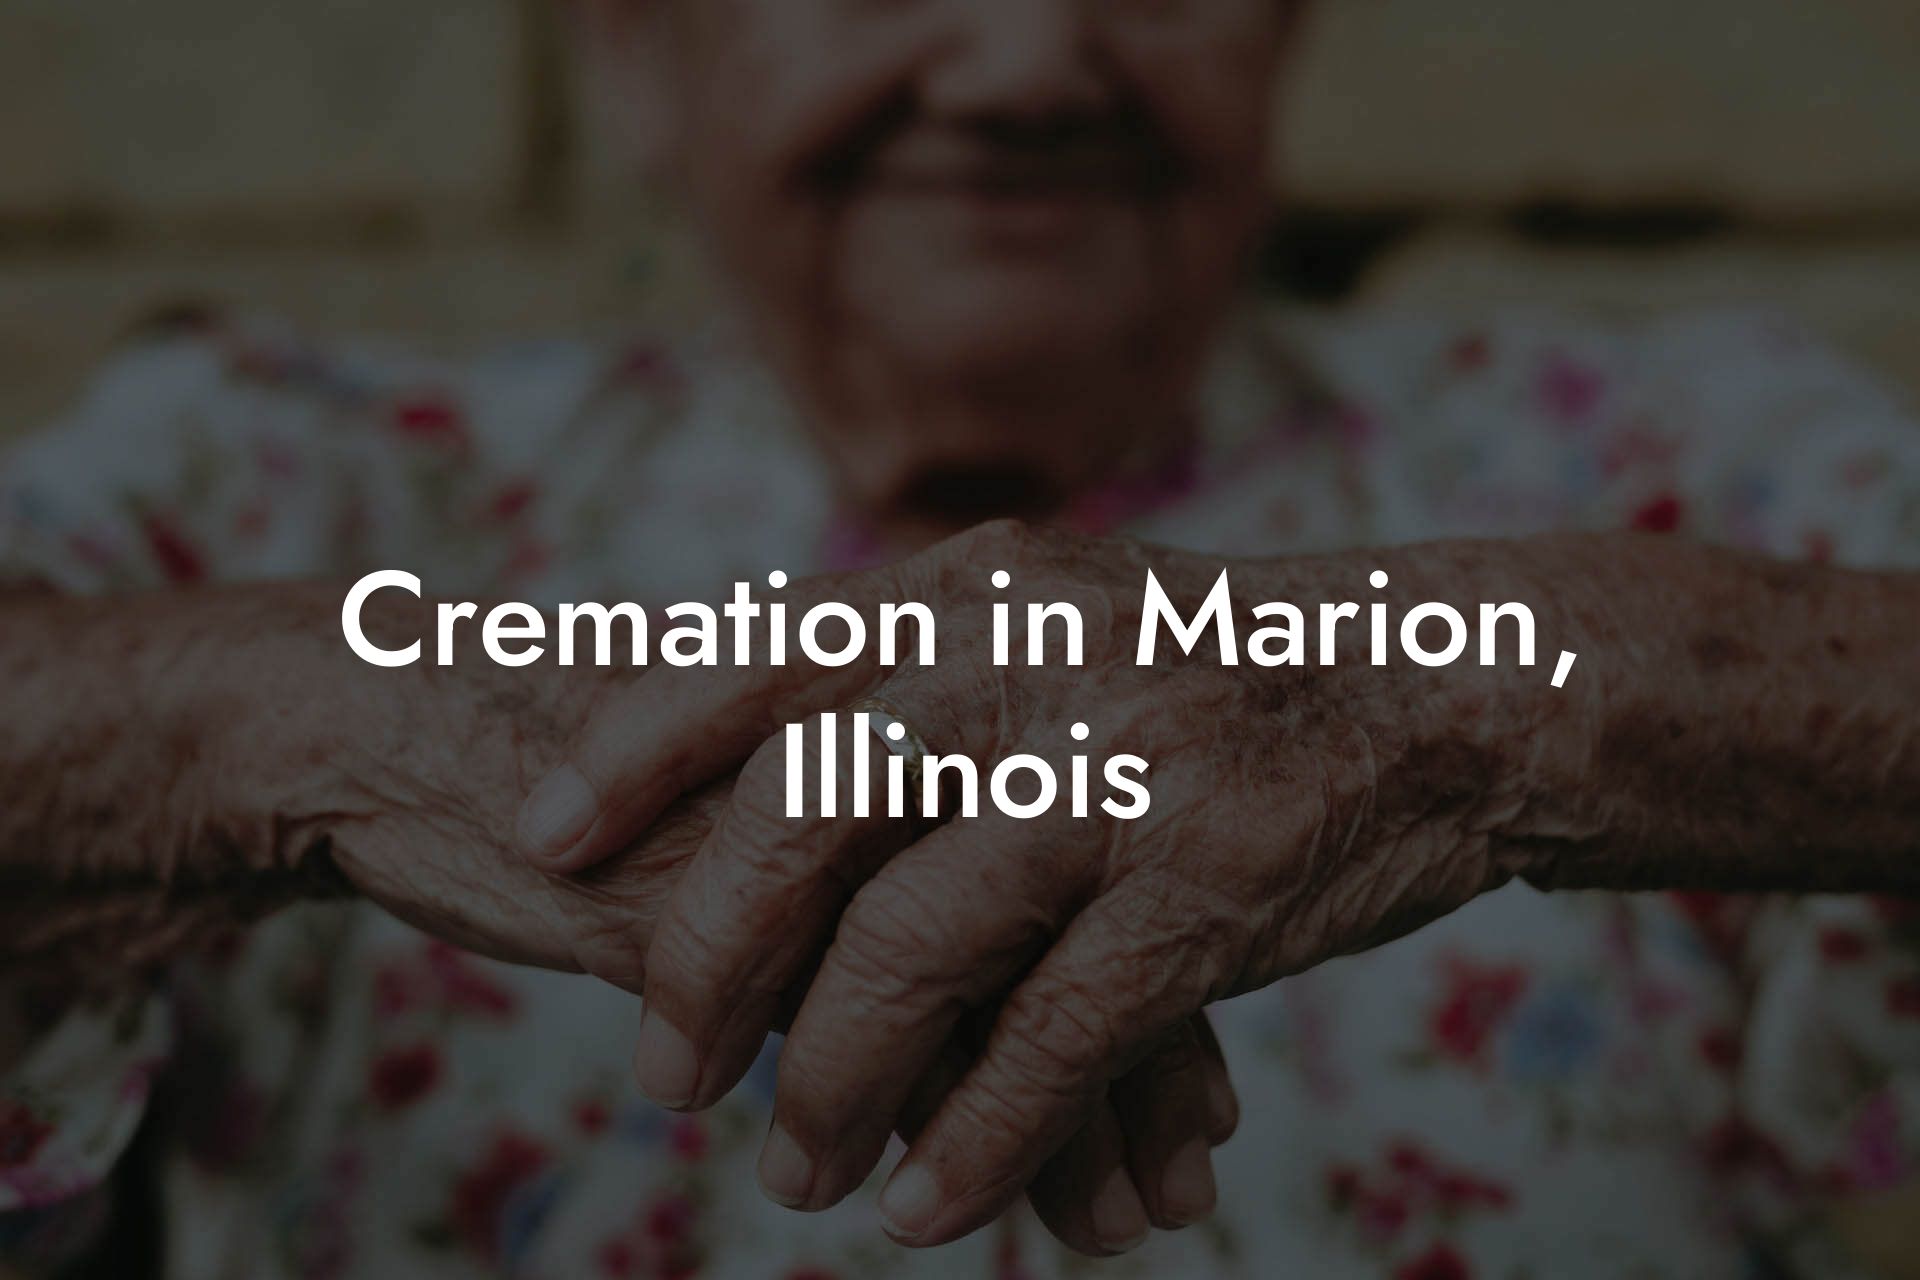 Cremation in Marion, Illinois